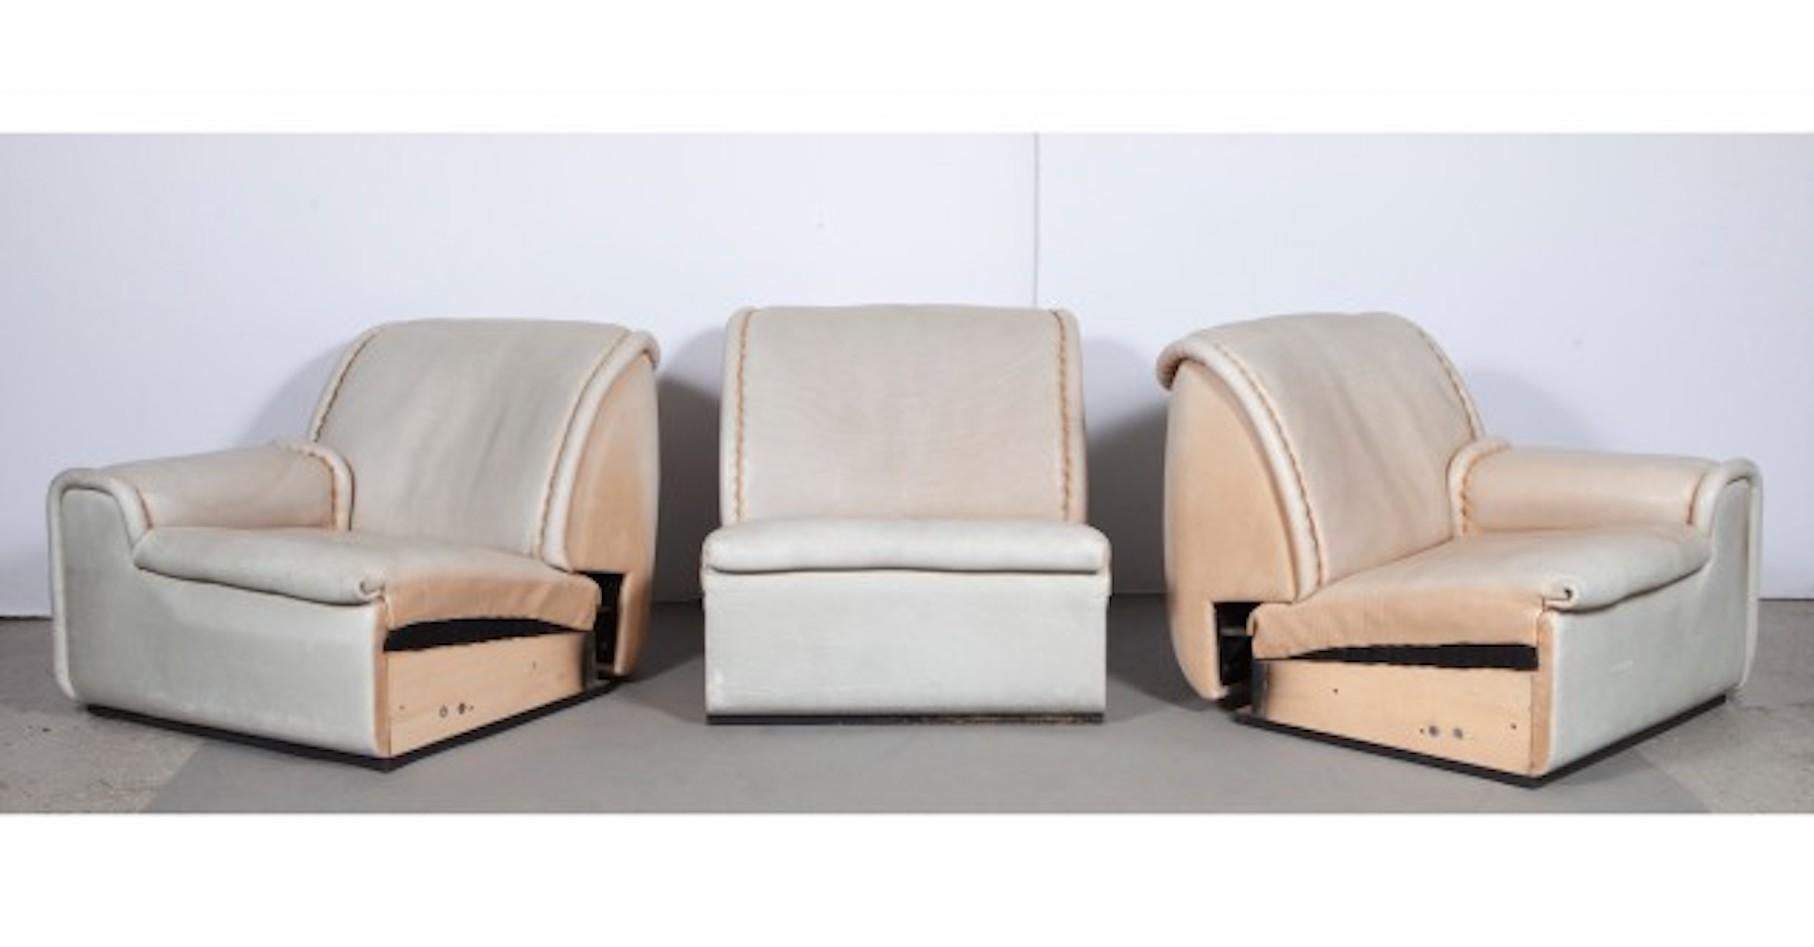 Off White Bull Leather Upholstered Sofa by de Sede for Pace Collection In Good Condition For Sale In Montreal, QC